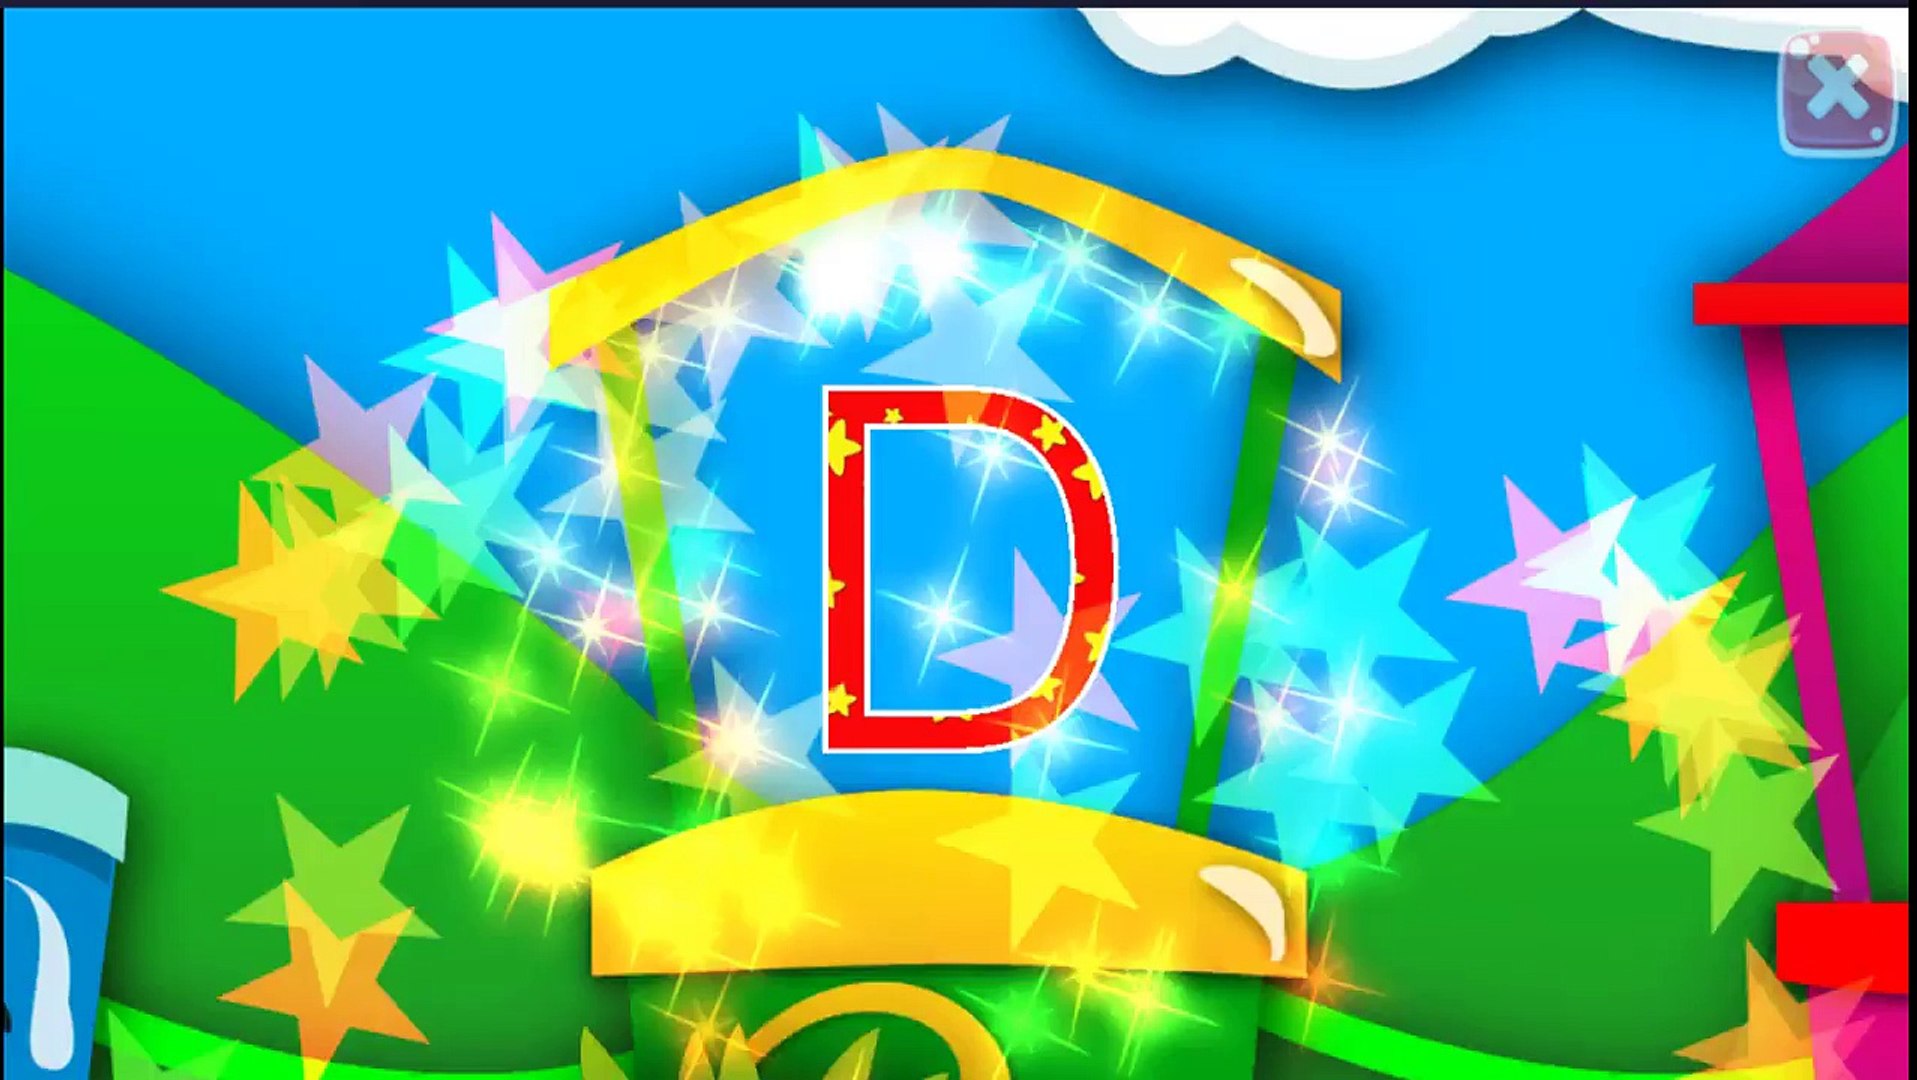 Learn ABC's with Kids World - Learn the alphabet - Alphabet letters education for kids